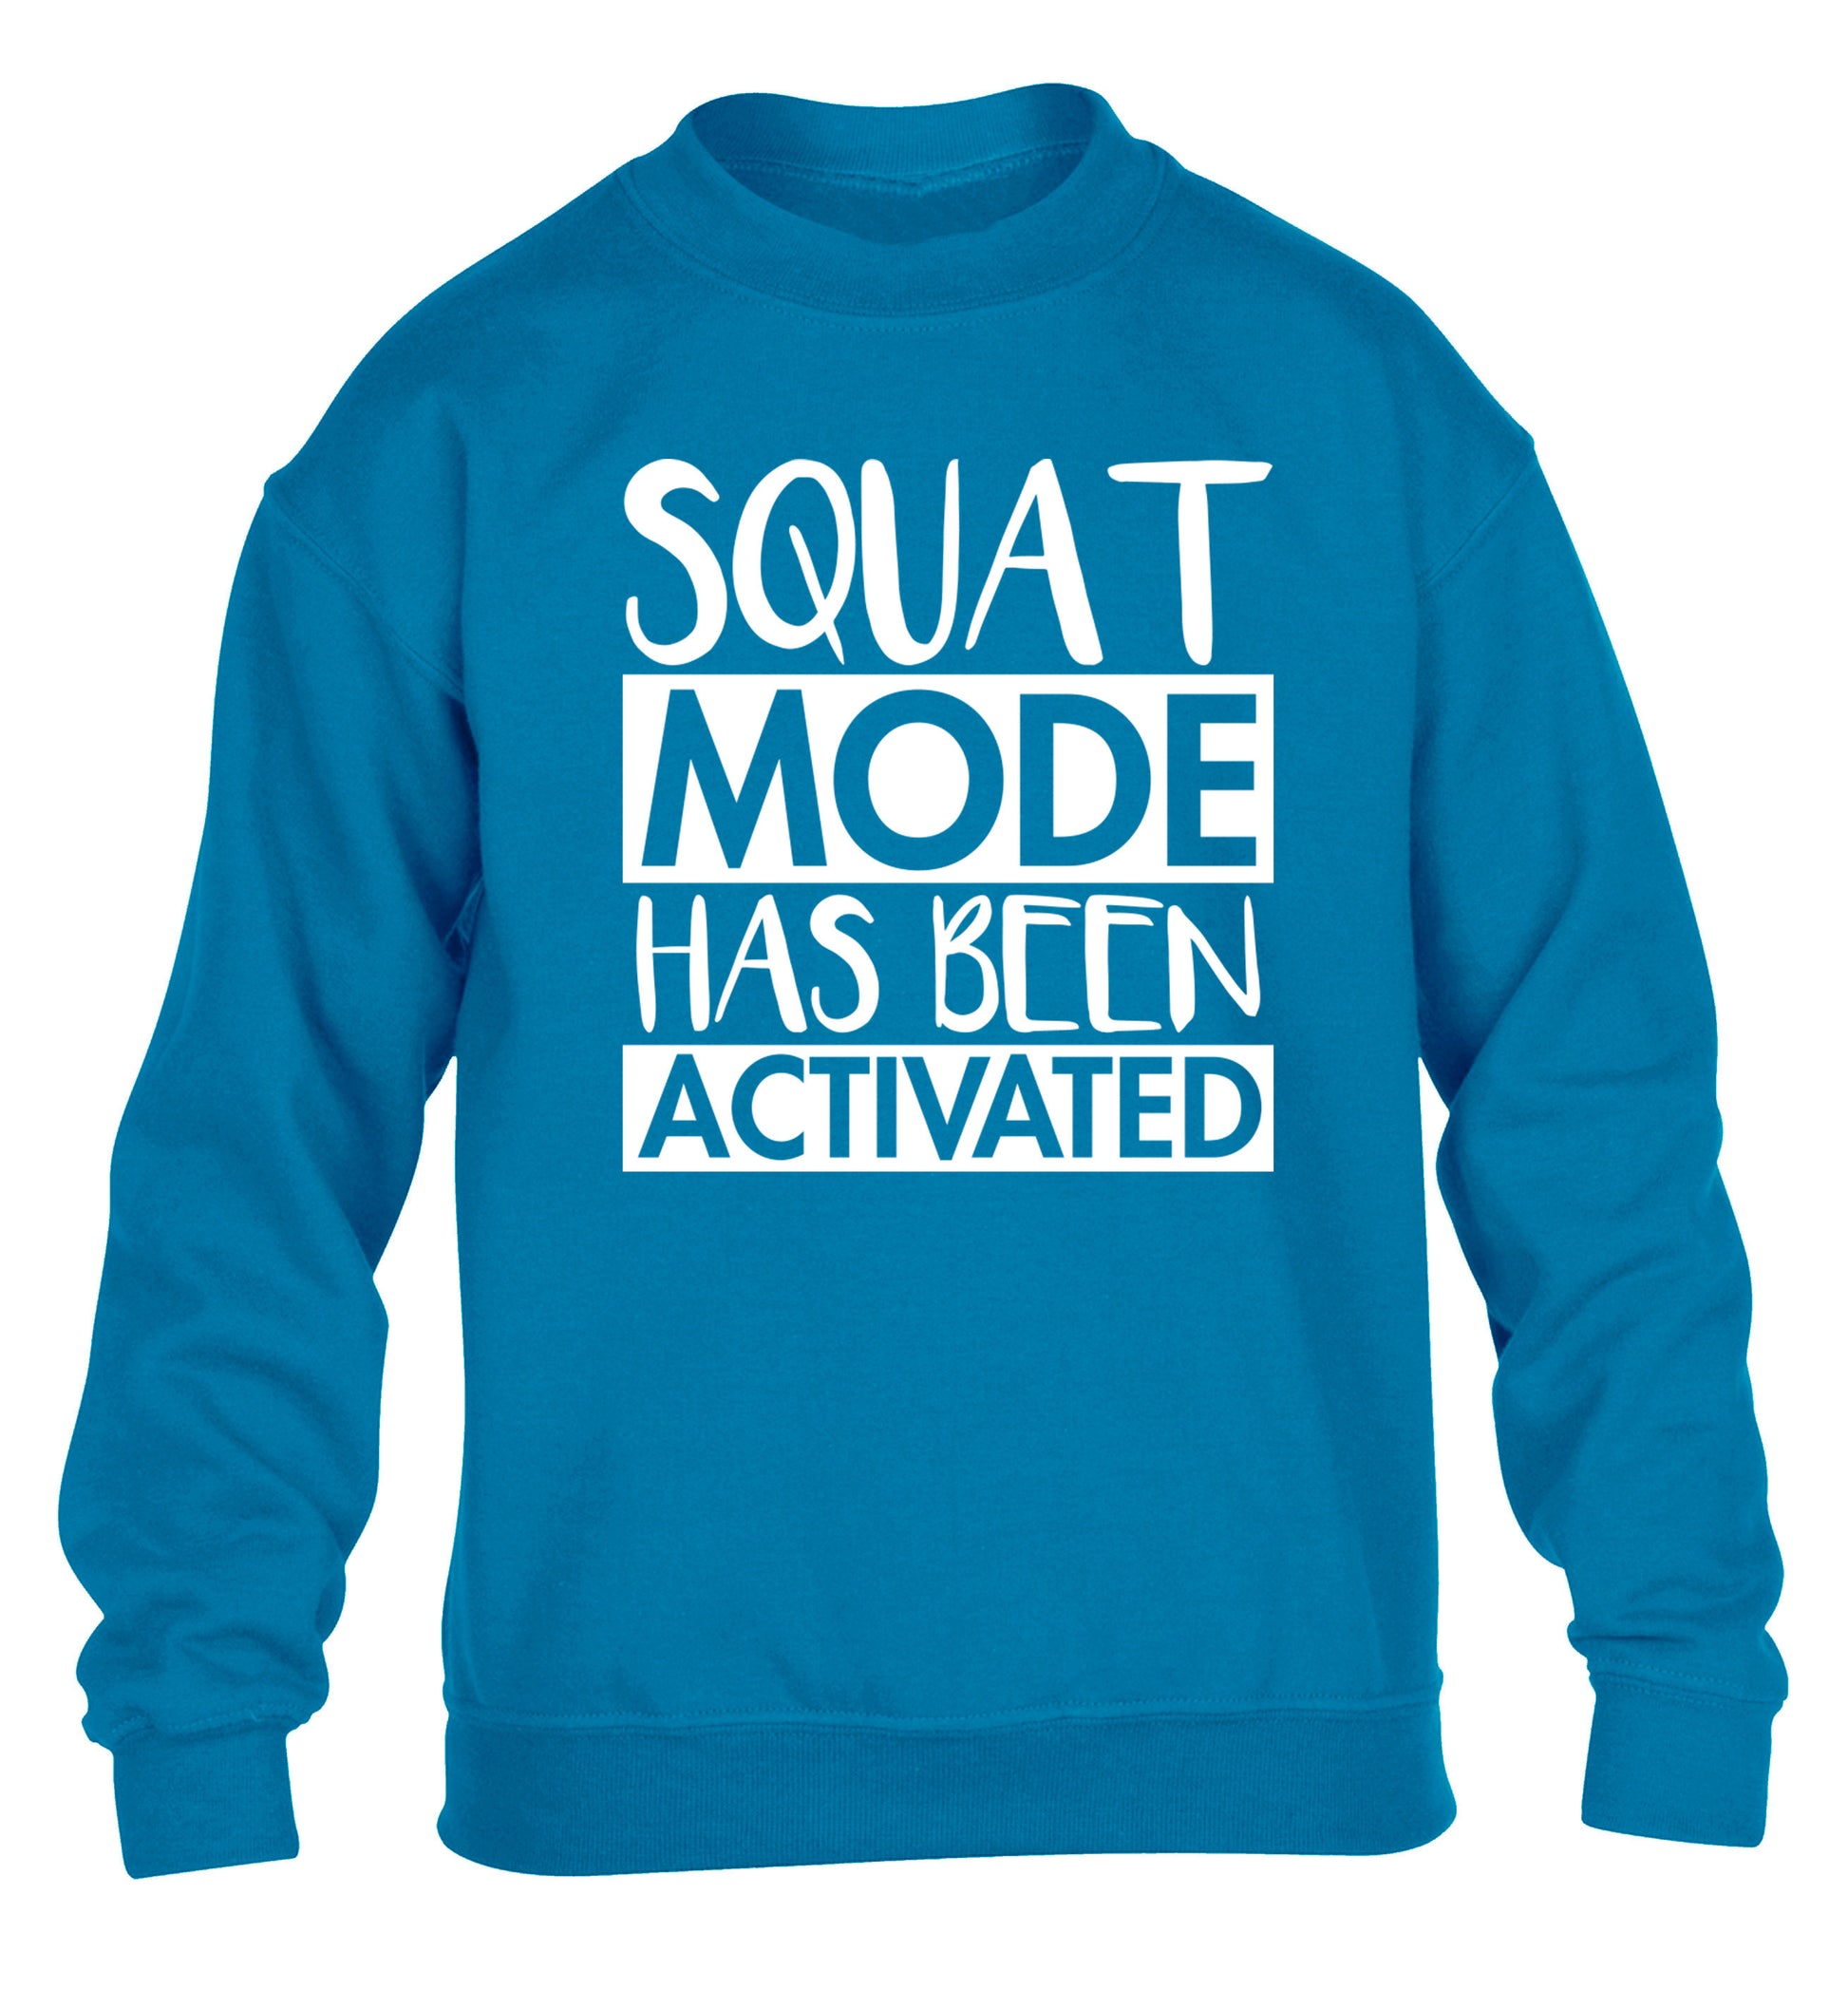 Squat mode activated children's blue sweater 12-14 Years